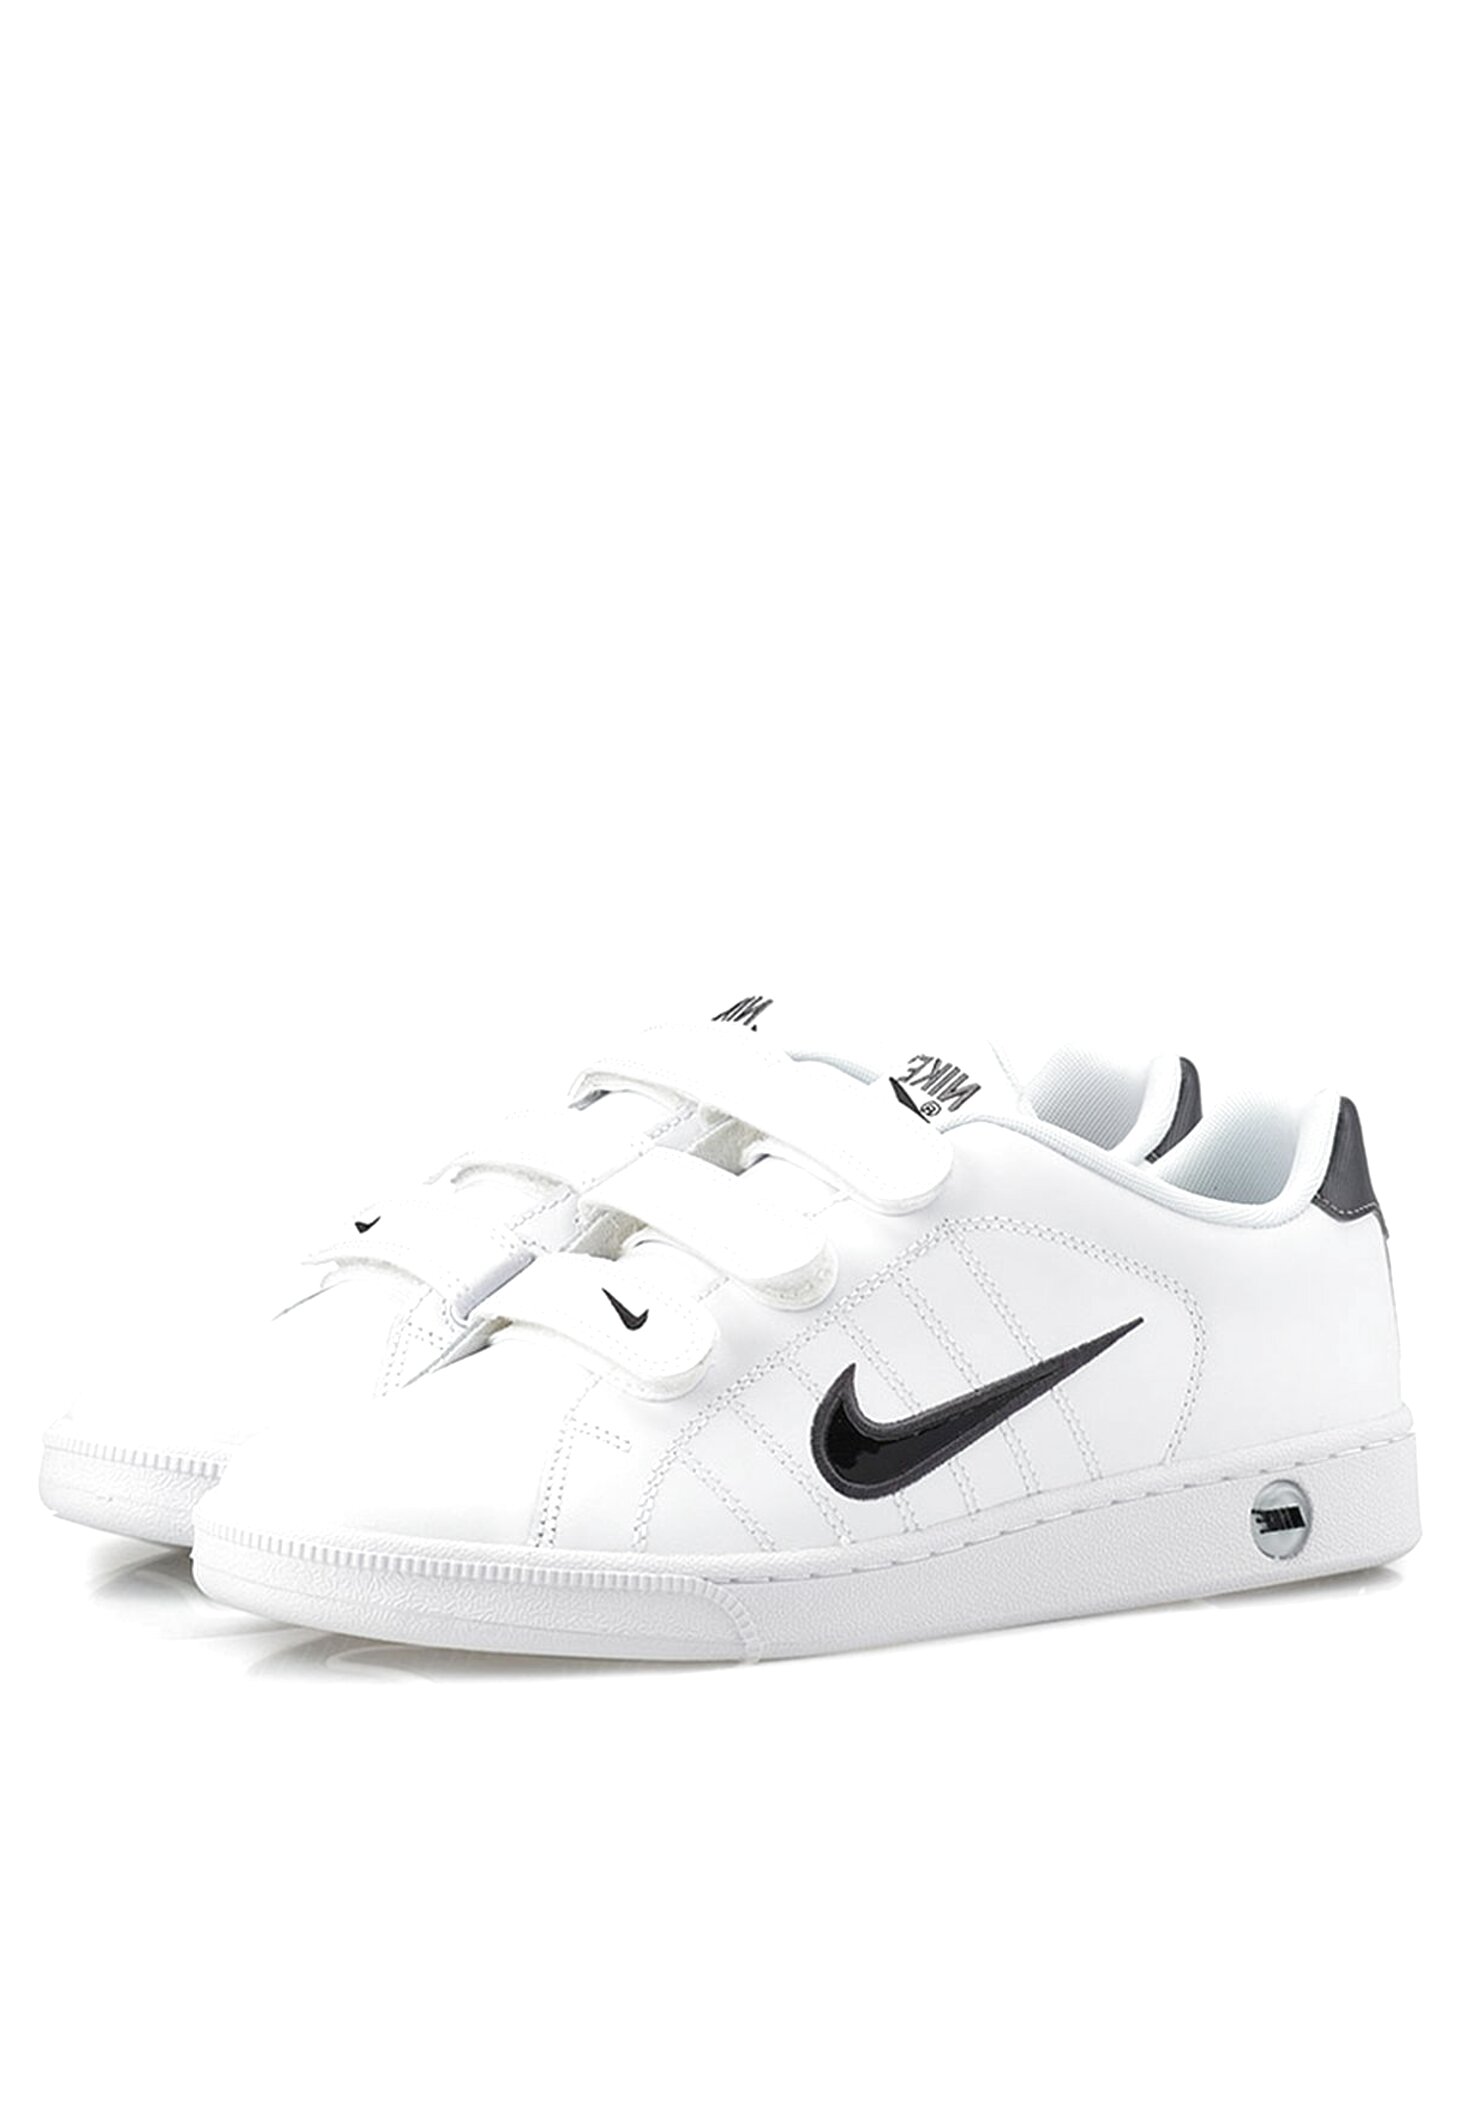 nike court tradition velcro